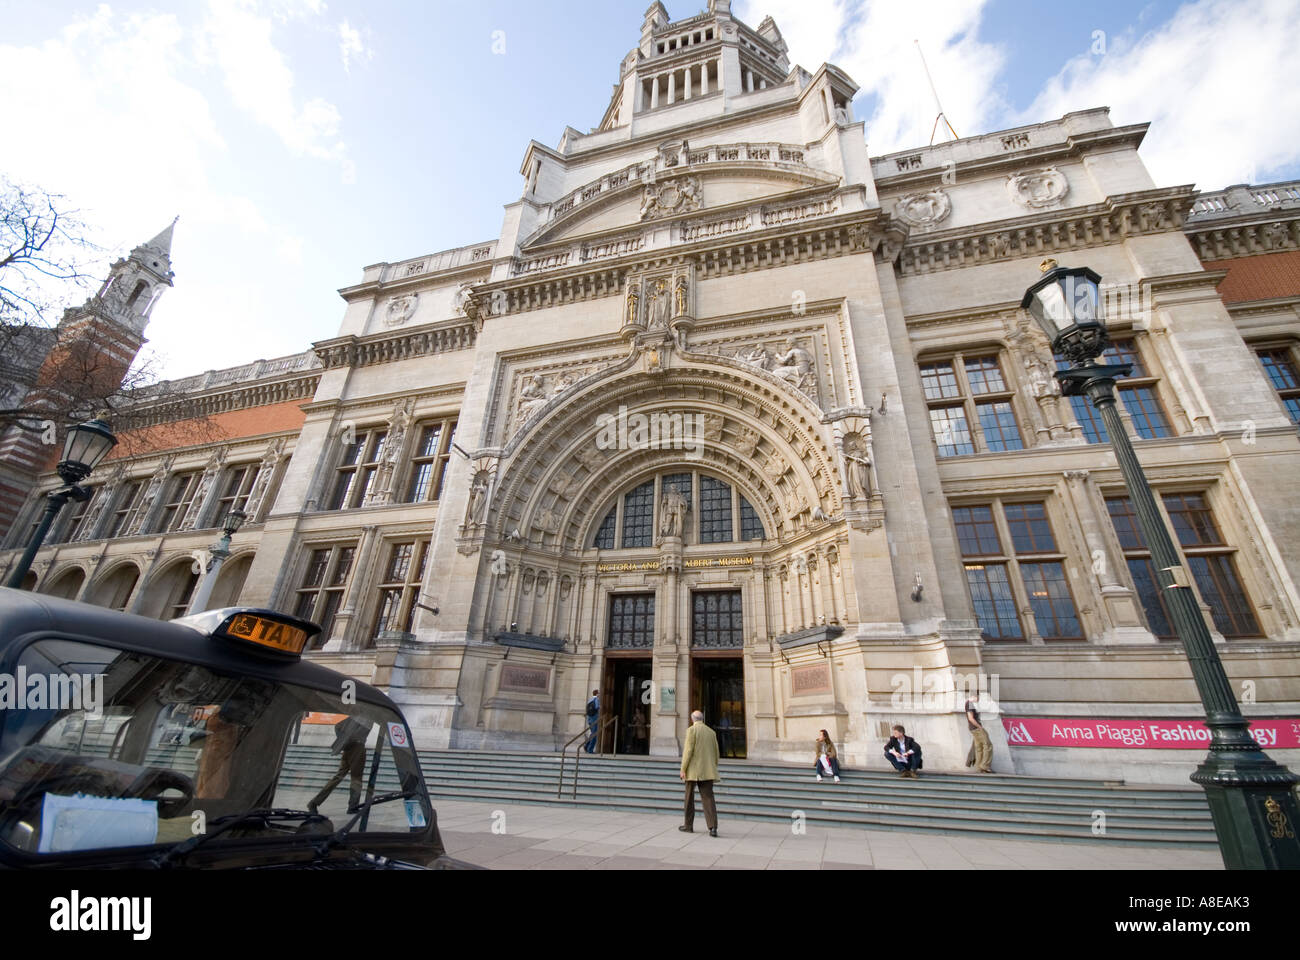 Victoria and Albert Museum front entrance and black taxi cab Stock Photo